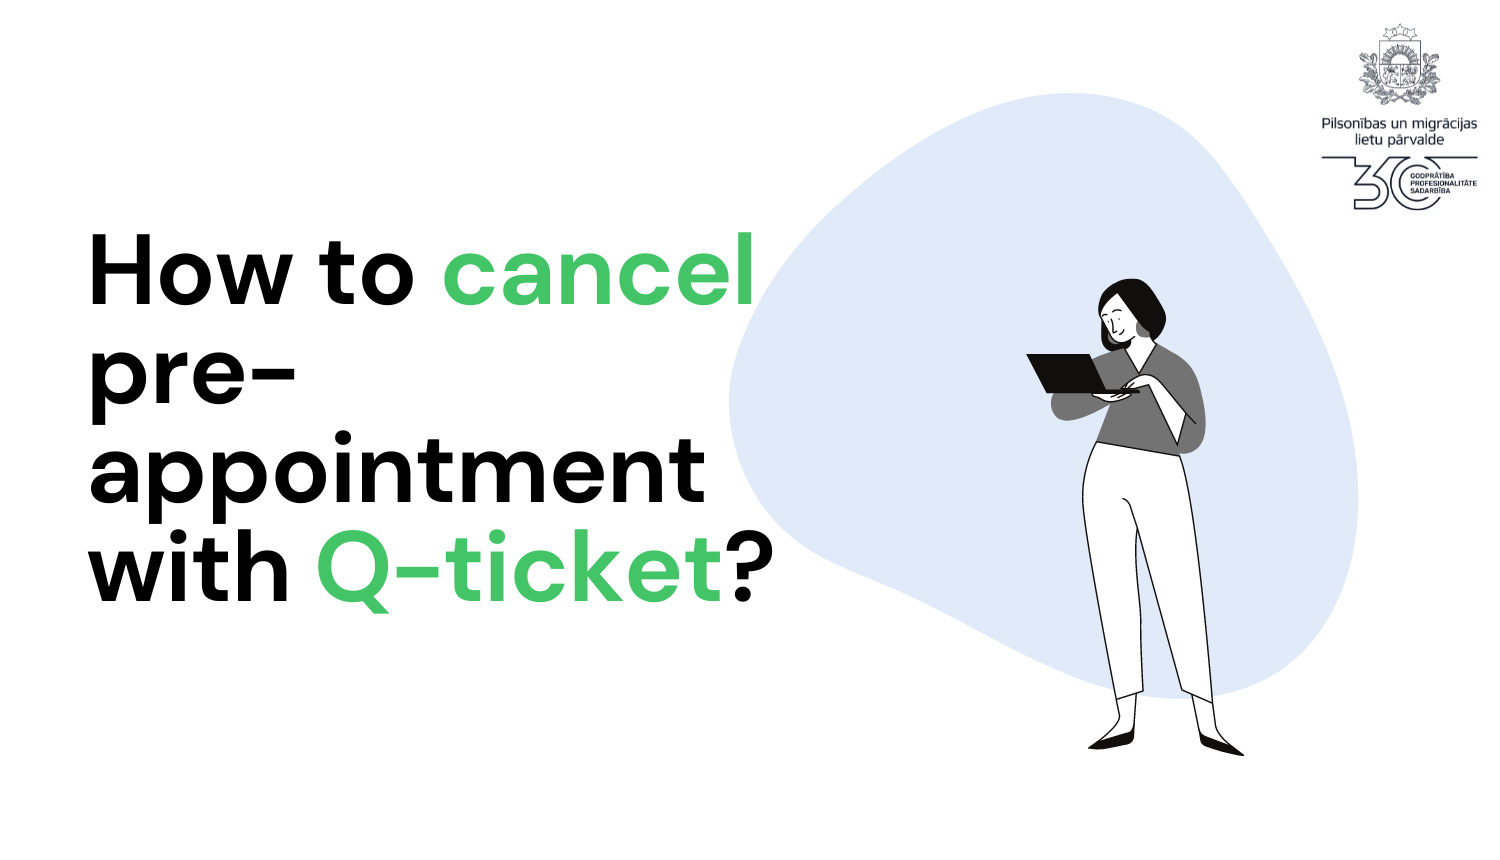 How to cancel pre-appointment with Q-ticket?